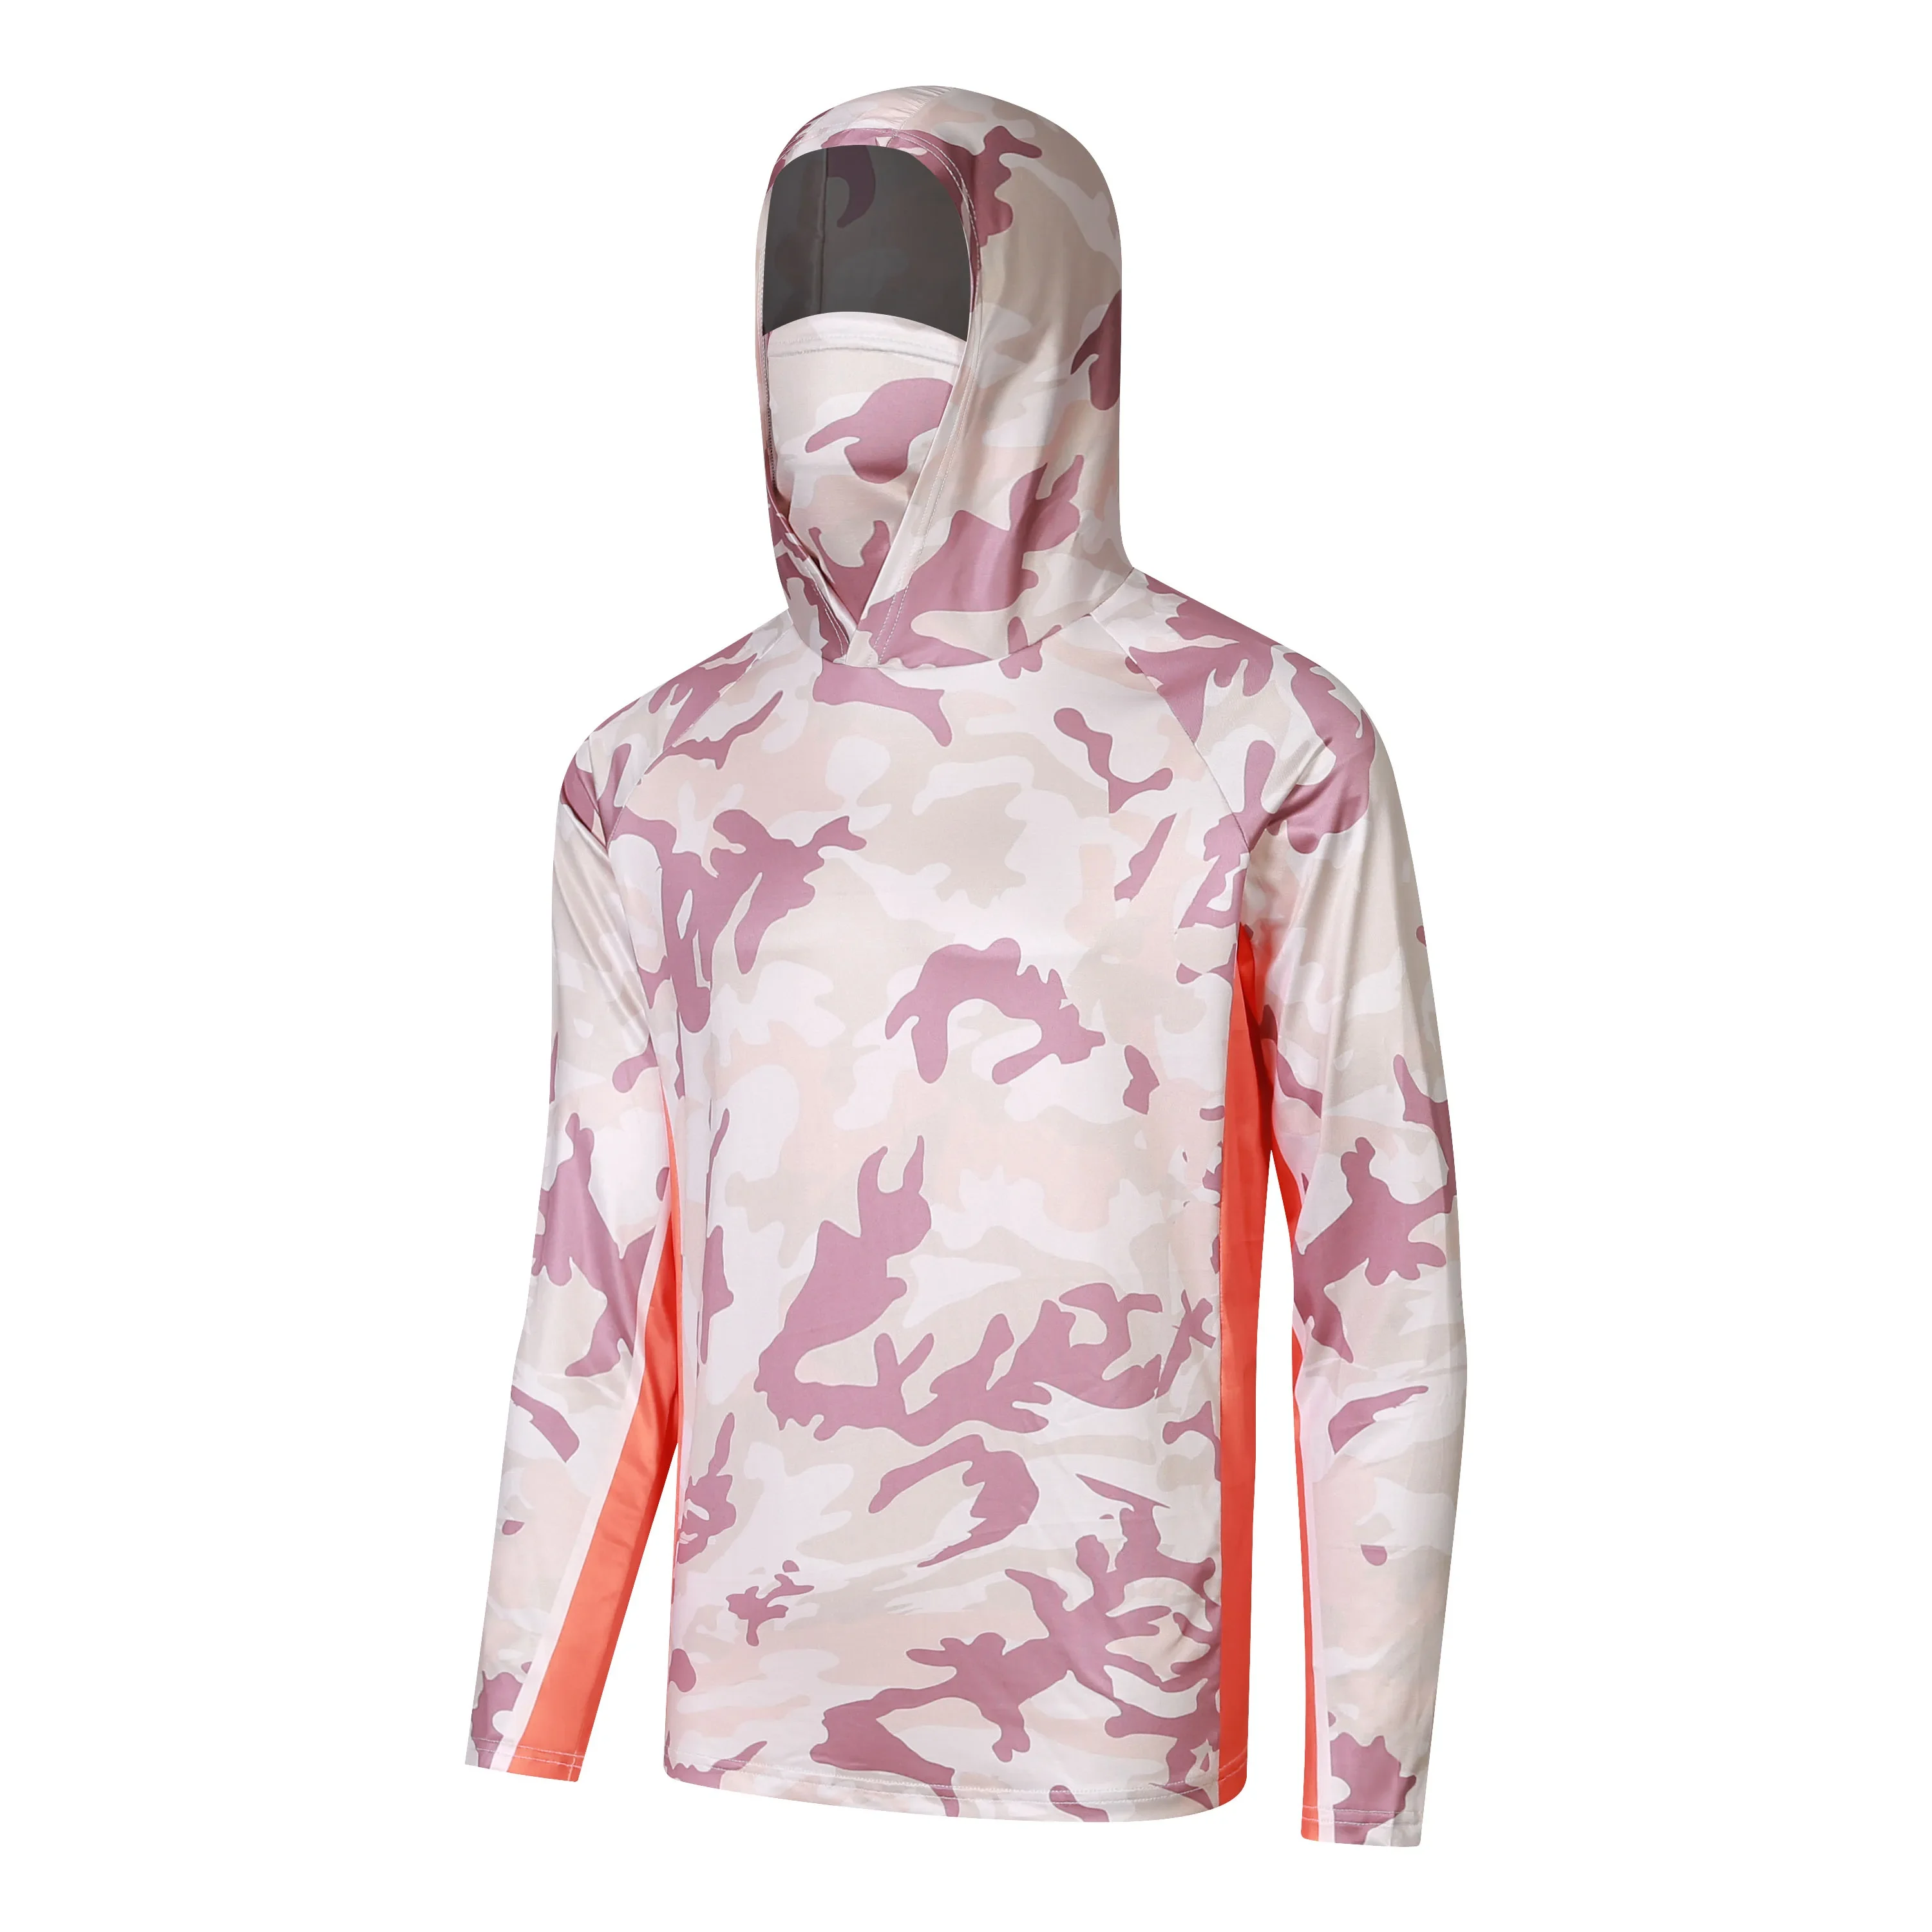 https://ae01.alicdn.com/kf/Sc1f29992ca534fbb9663da9241b726d6K/Fishing-Hooded-Shirts-Face-Cover-Men-Long-Sleeve-Protection-Performance-Fishing-Clothing-Breathable-Fishing-Apparel.jpg